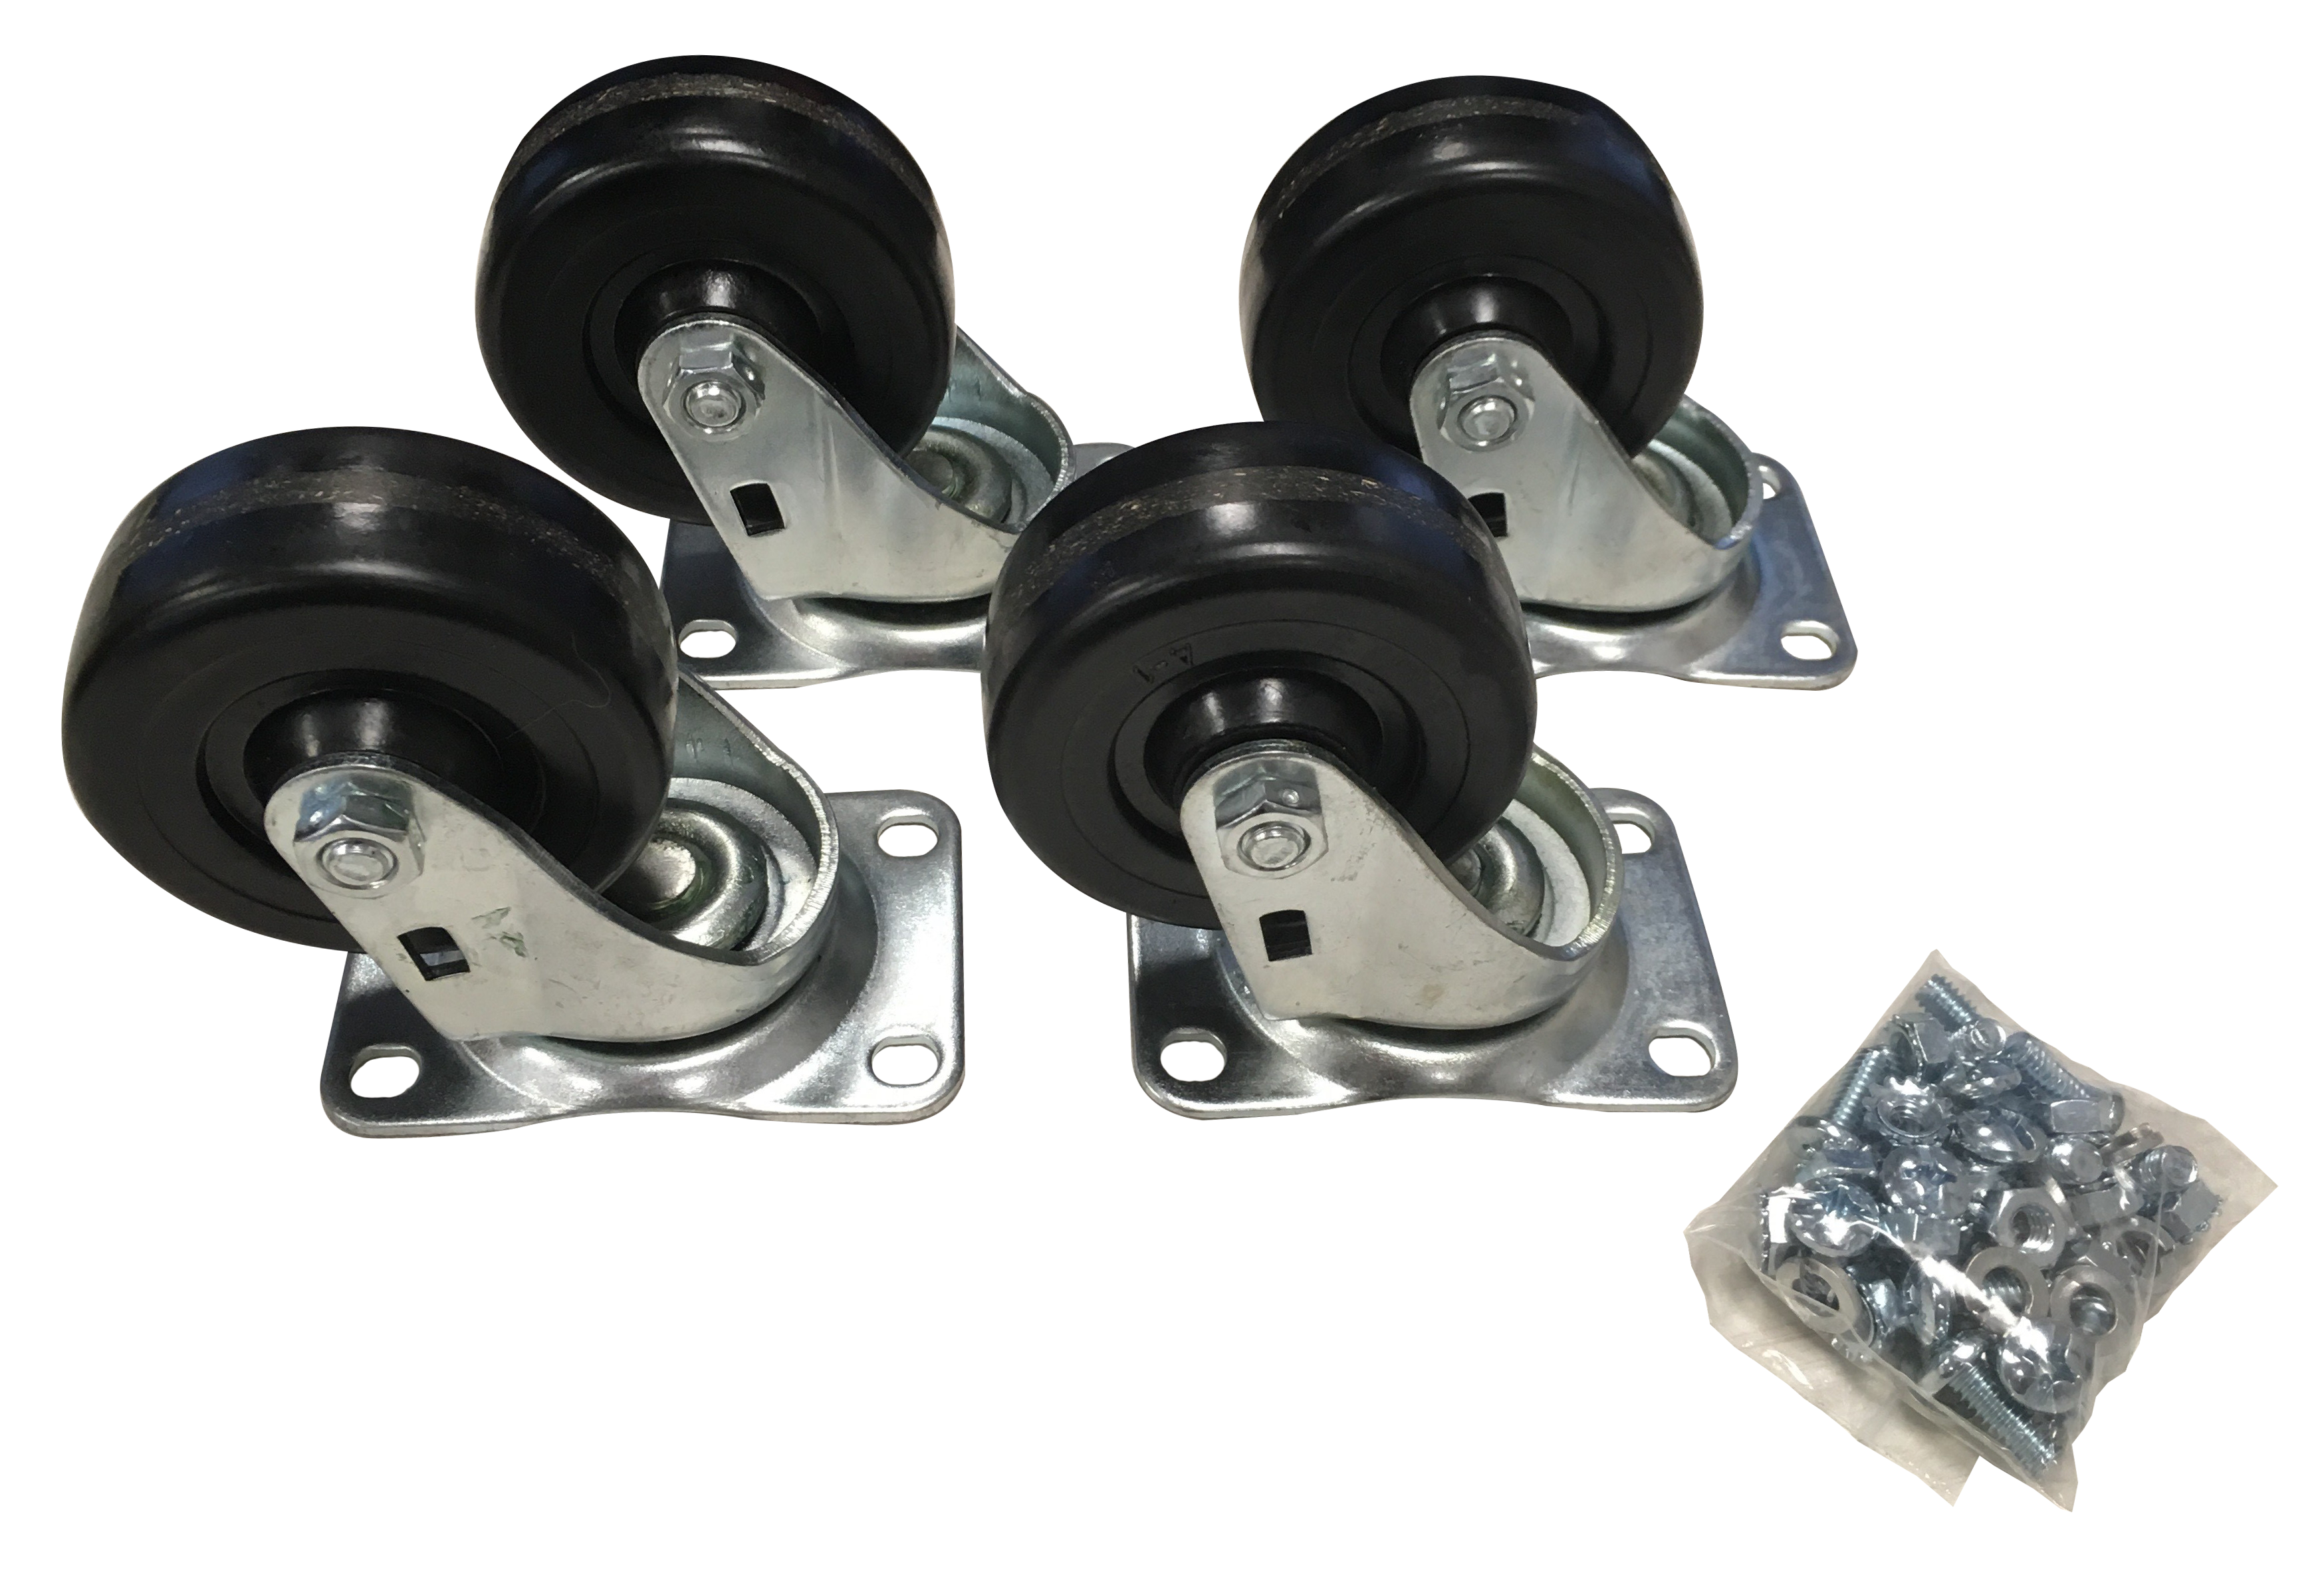 Cabinet Caster Set 1425B Series  Up to 1050 lbs|475 kg Weight Capacity